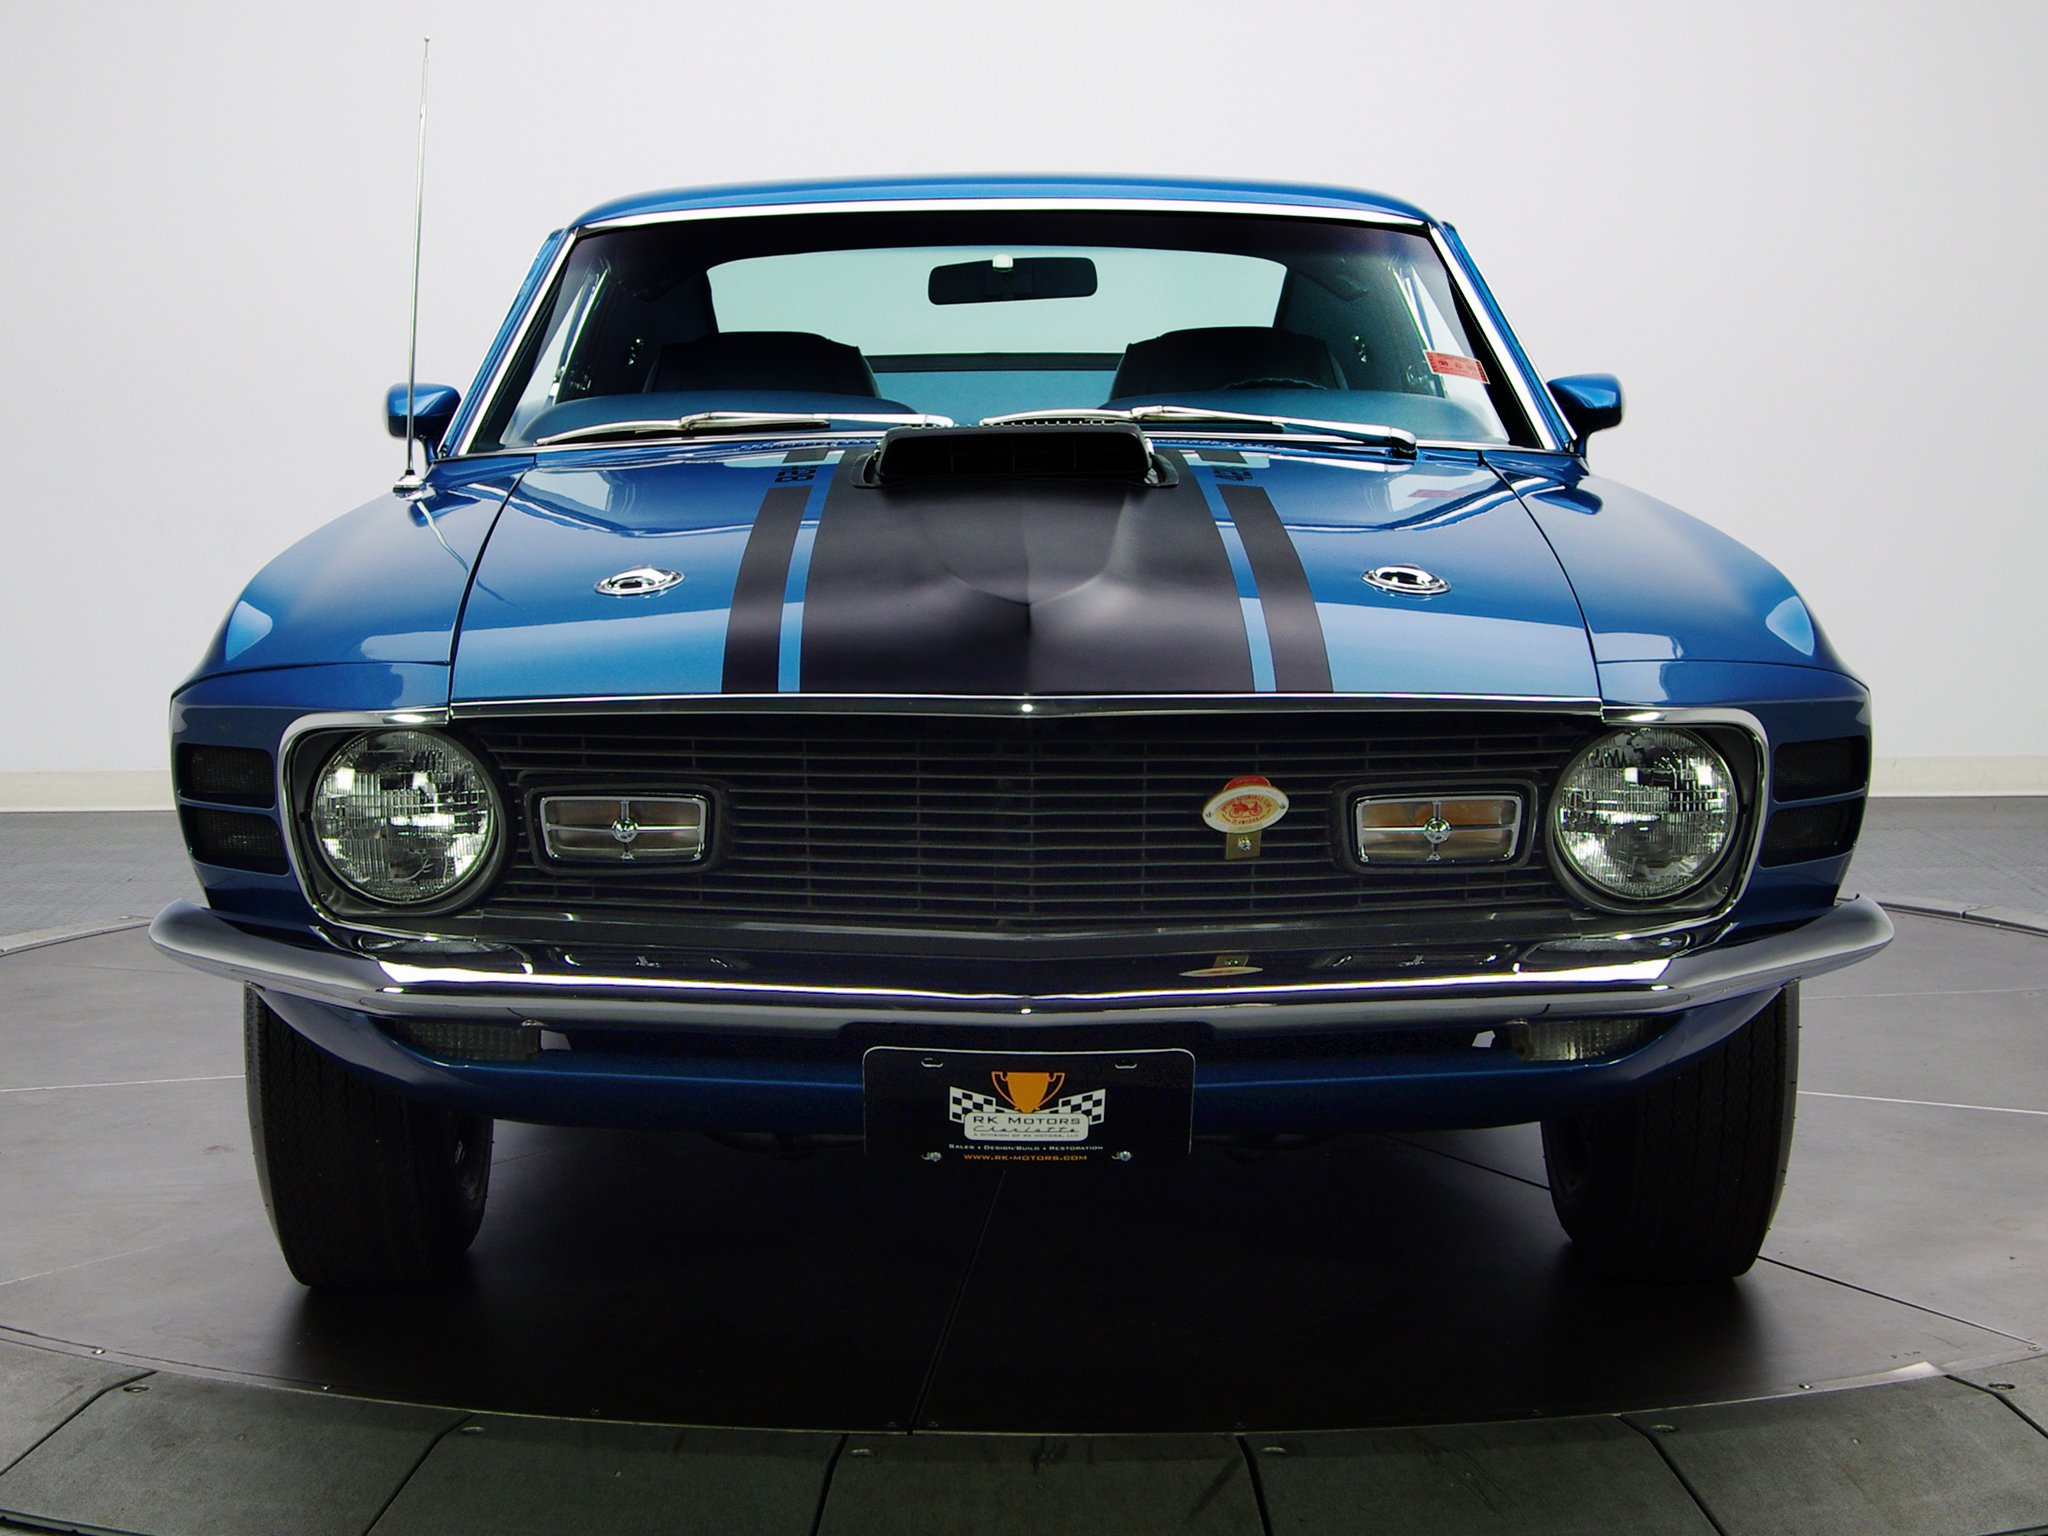 1970 Ford Mustang Mach 1 428 Super Cobra Jet Muscle Classic